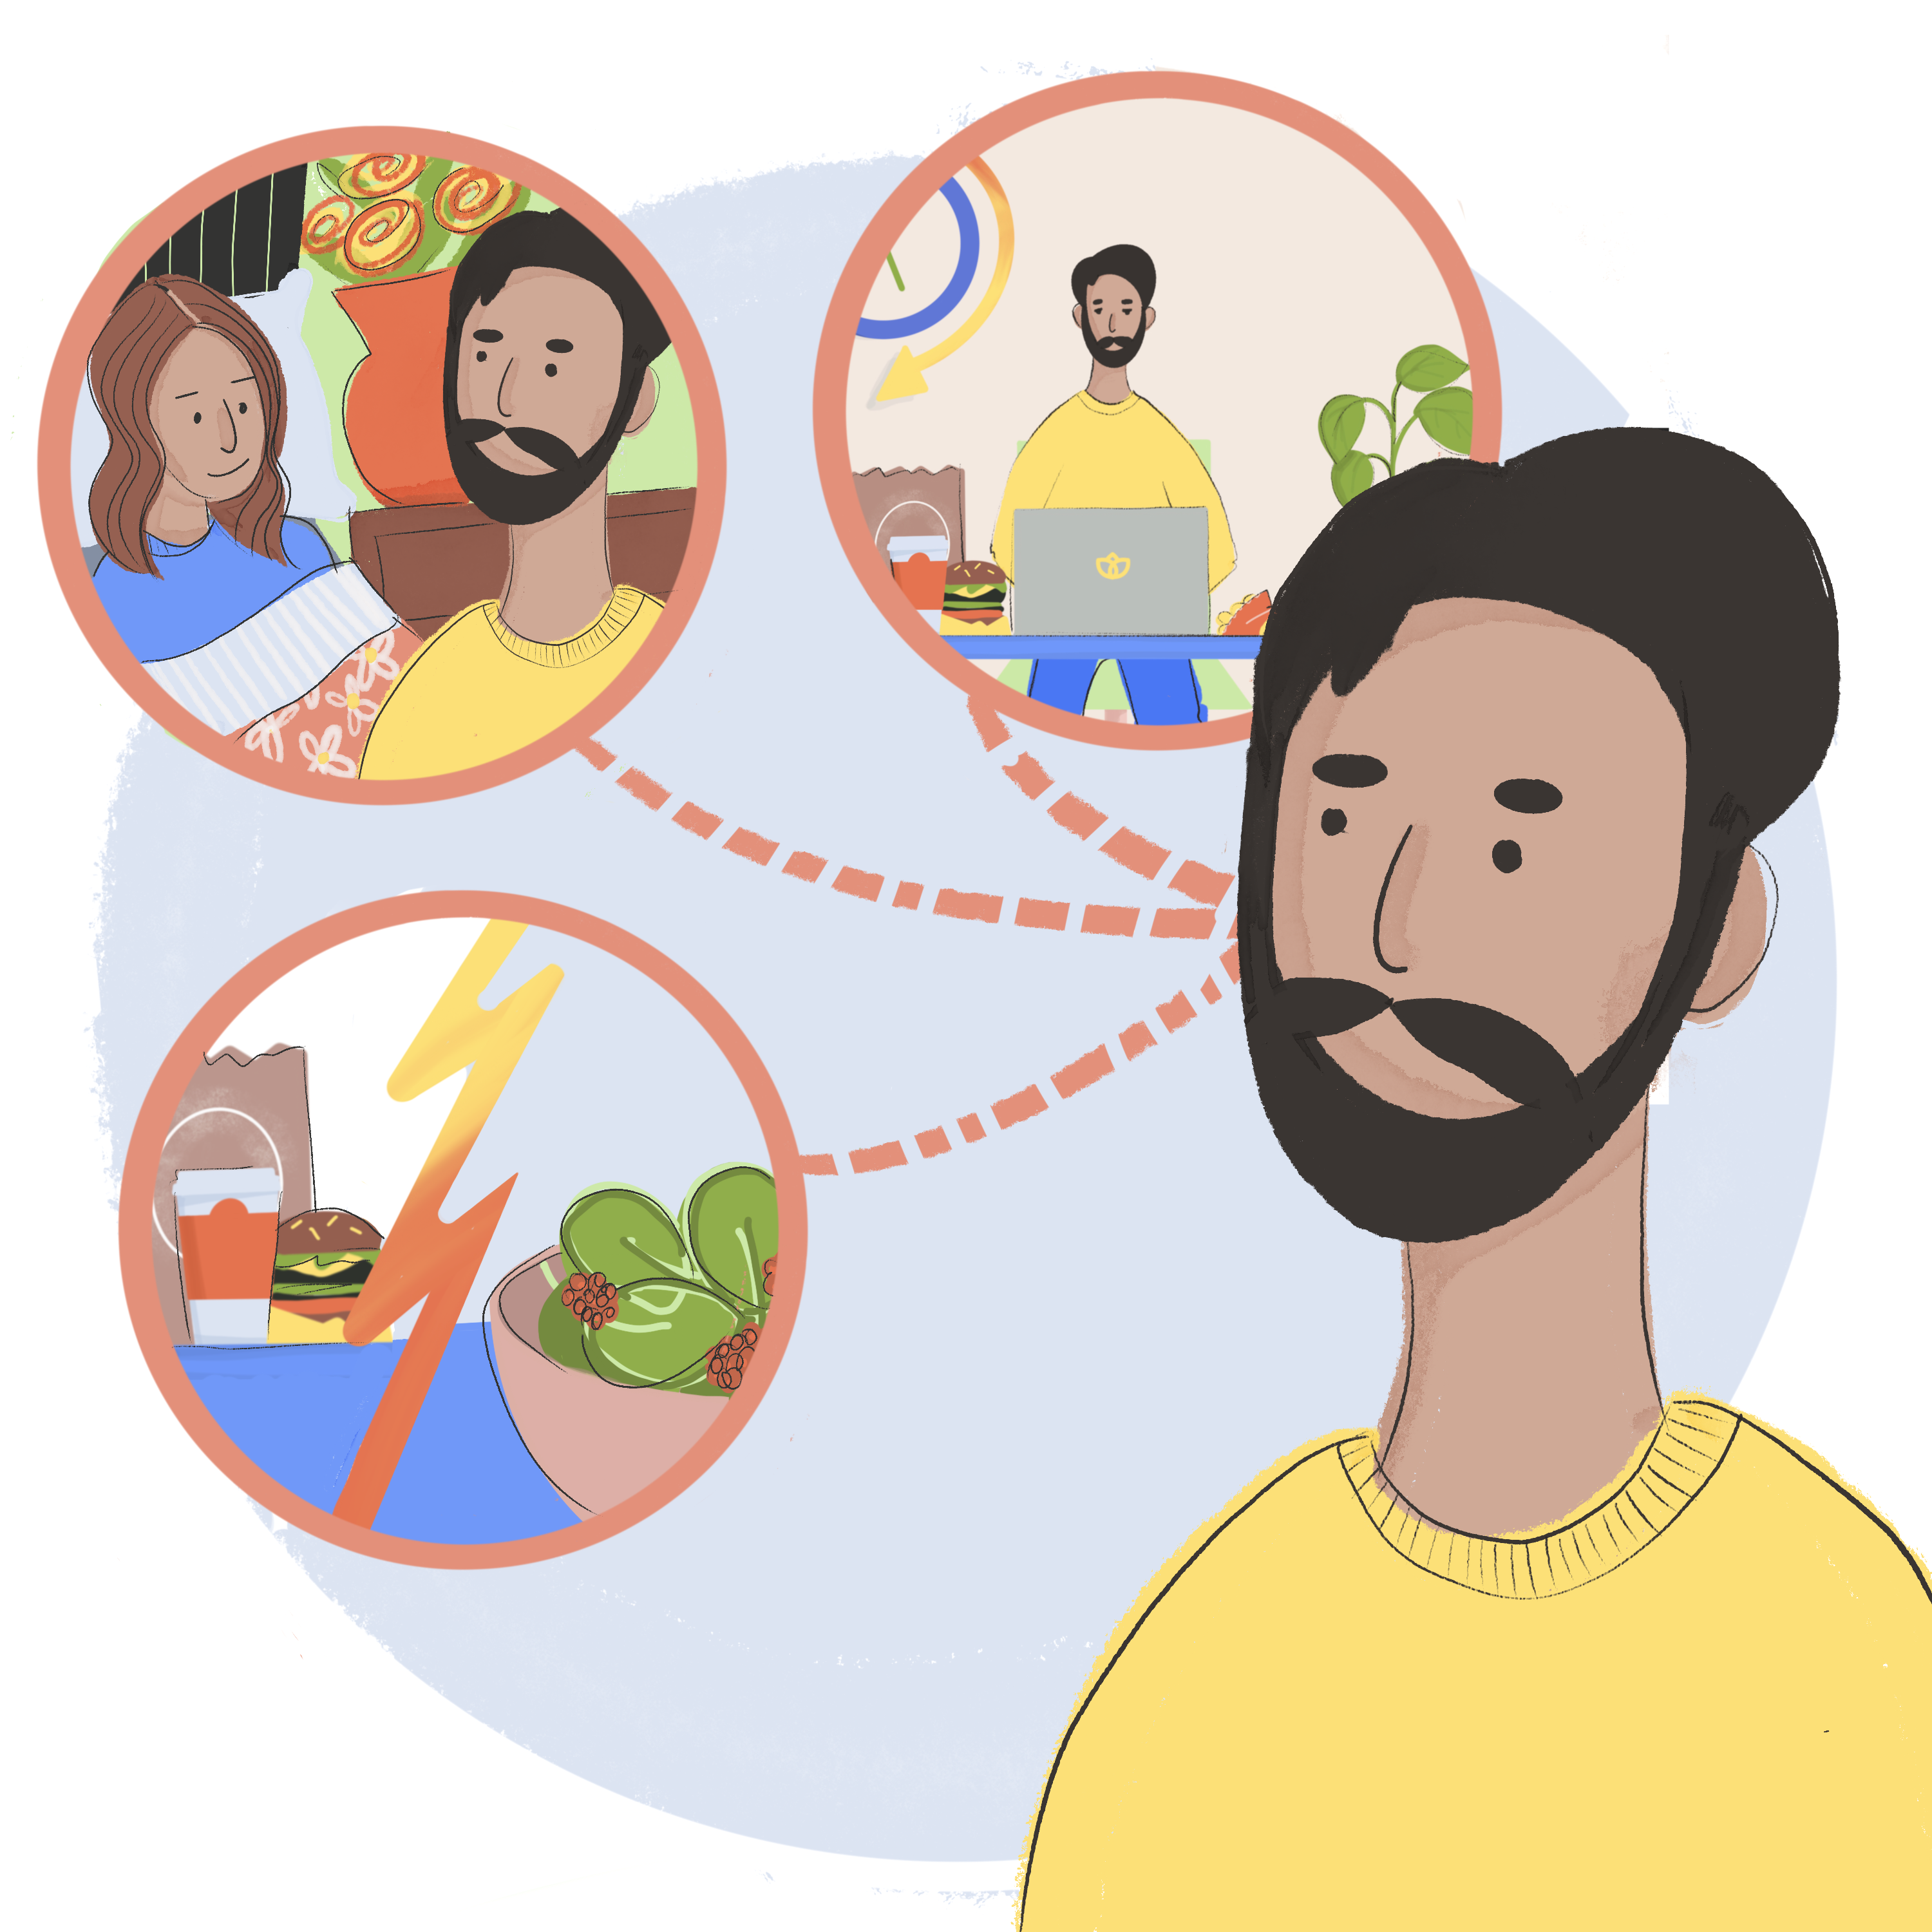 An illustration showing a character Bob. Bob is caring for his Mom and learning about his own health risks. They are depicted in bubbles and include sedentary lifestyle and bad diet.